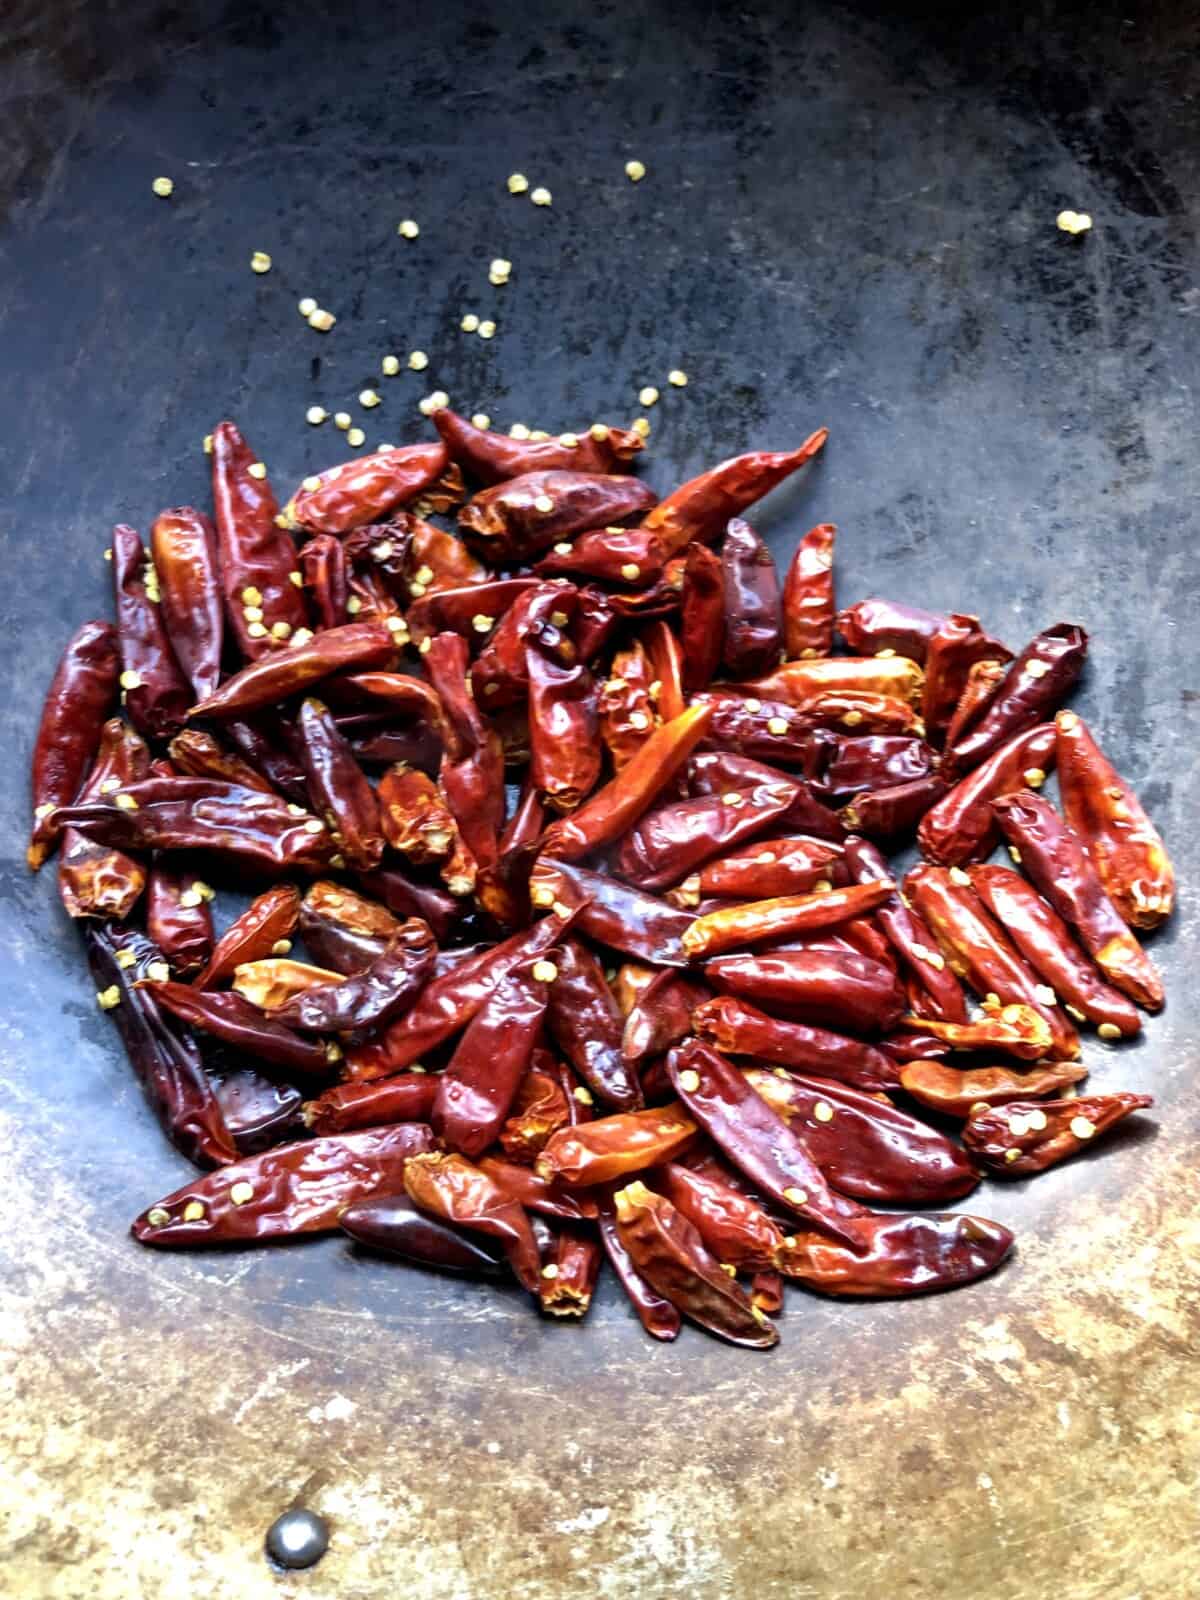 Dried Facing Heaven chilis after being rinsed and added to a wok